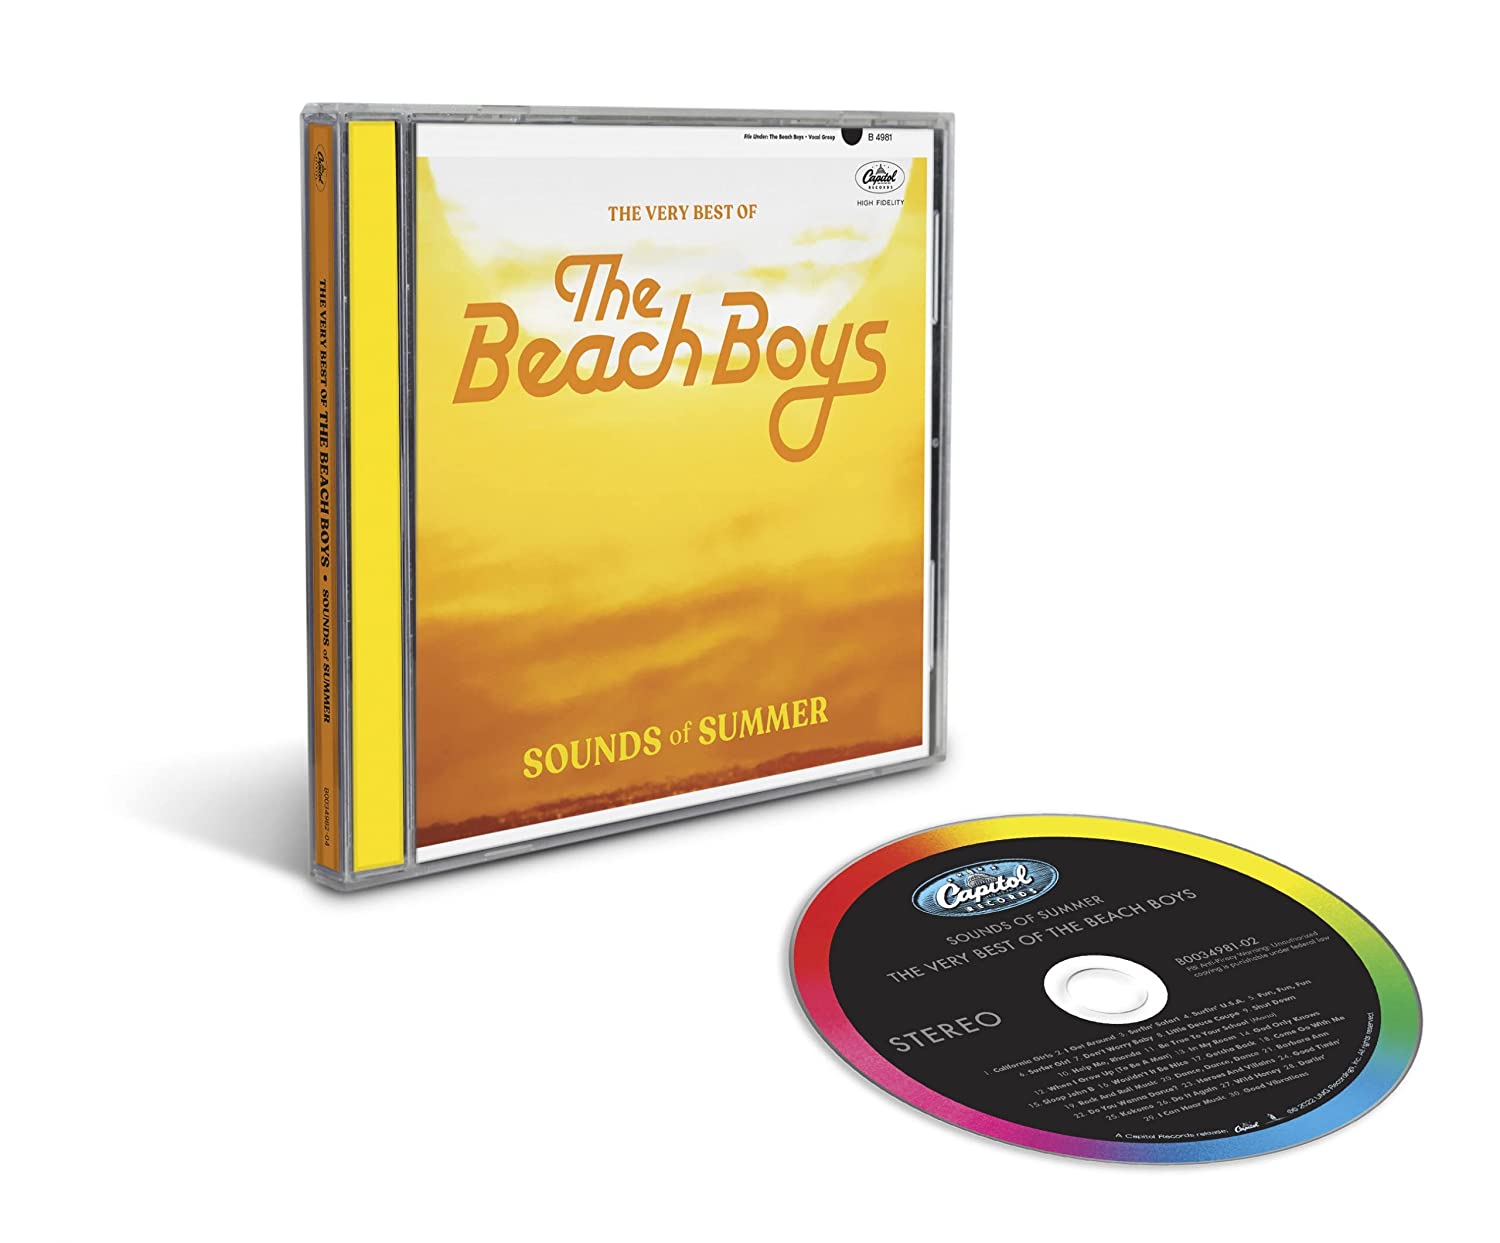 The Beach Boys (비치 보이스) - Sounds Of Summer - Very Best Of 